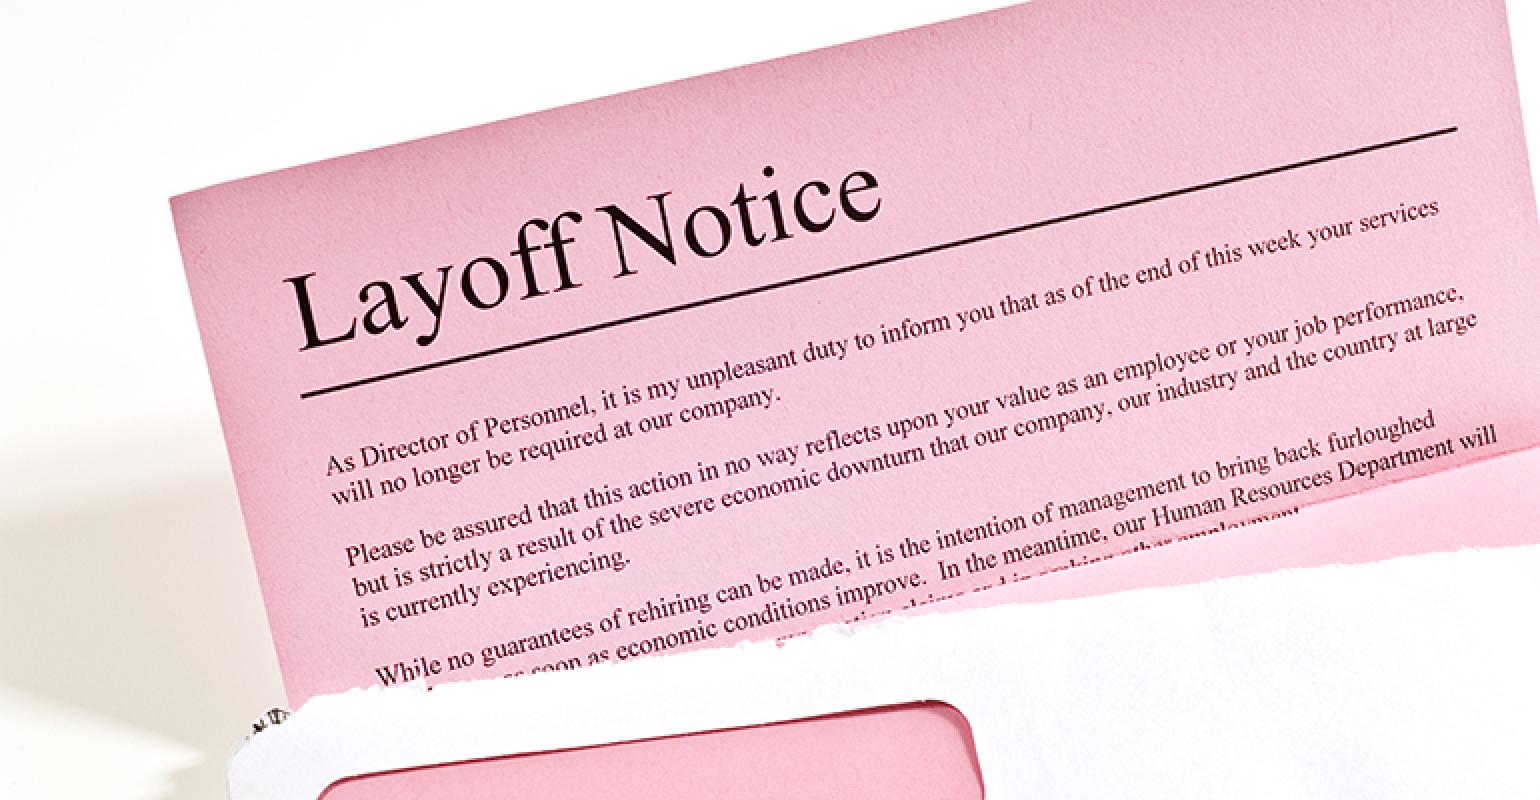 Retailer files notice with state warning of layoffs for store